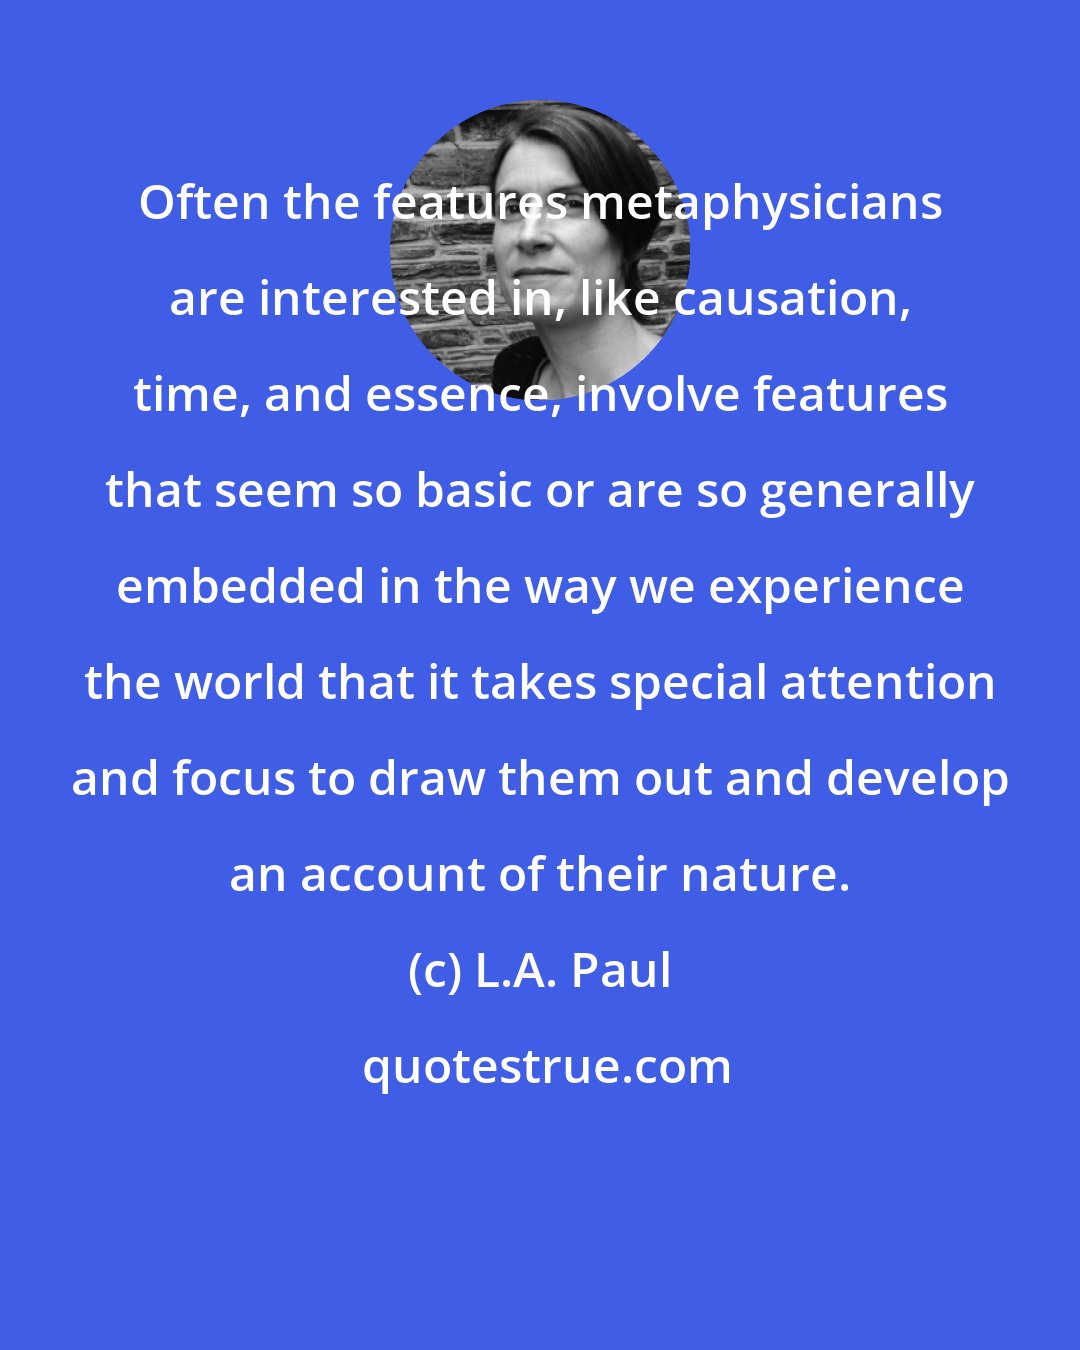 L.A. Paul: Often the features metaphysicians are interested in, like causation, time, and essence, involve features that seem so basic or are so generally embedded in the way we experience the world that it takes special attention and focus to draw them out and develop an account of their nature.